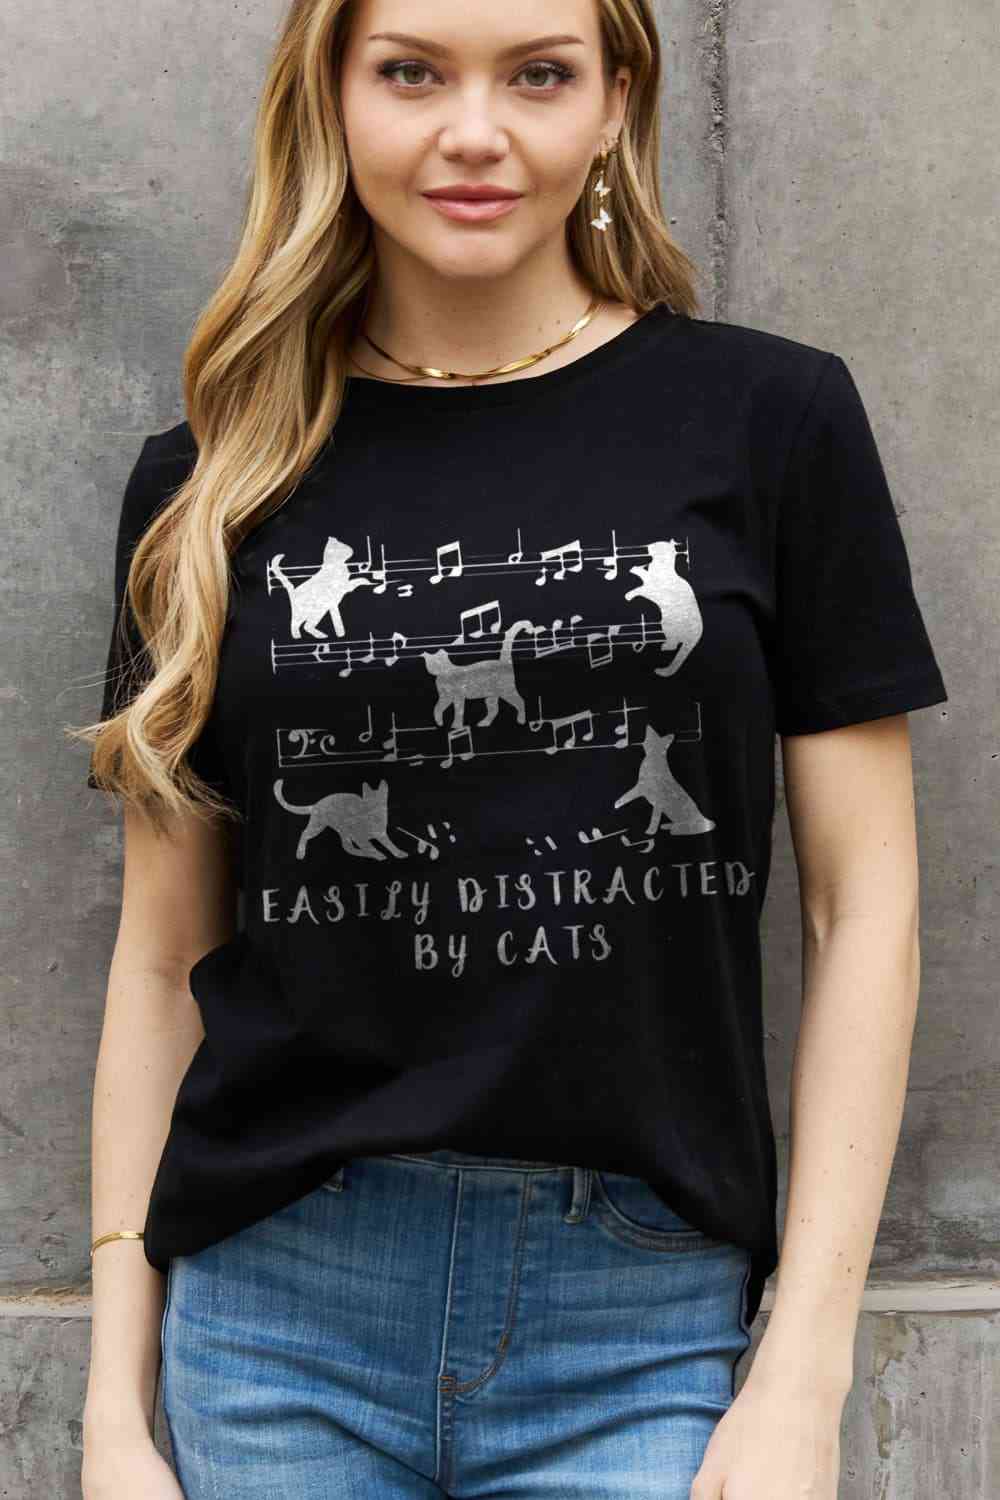 EASILY DISTRACTED BY CATS Graphic Cotton Tee - T-Shirts - Shirts & Tops - 11 - 2024